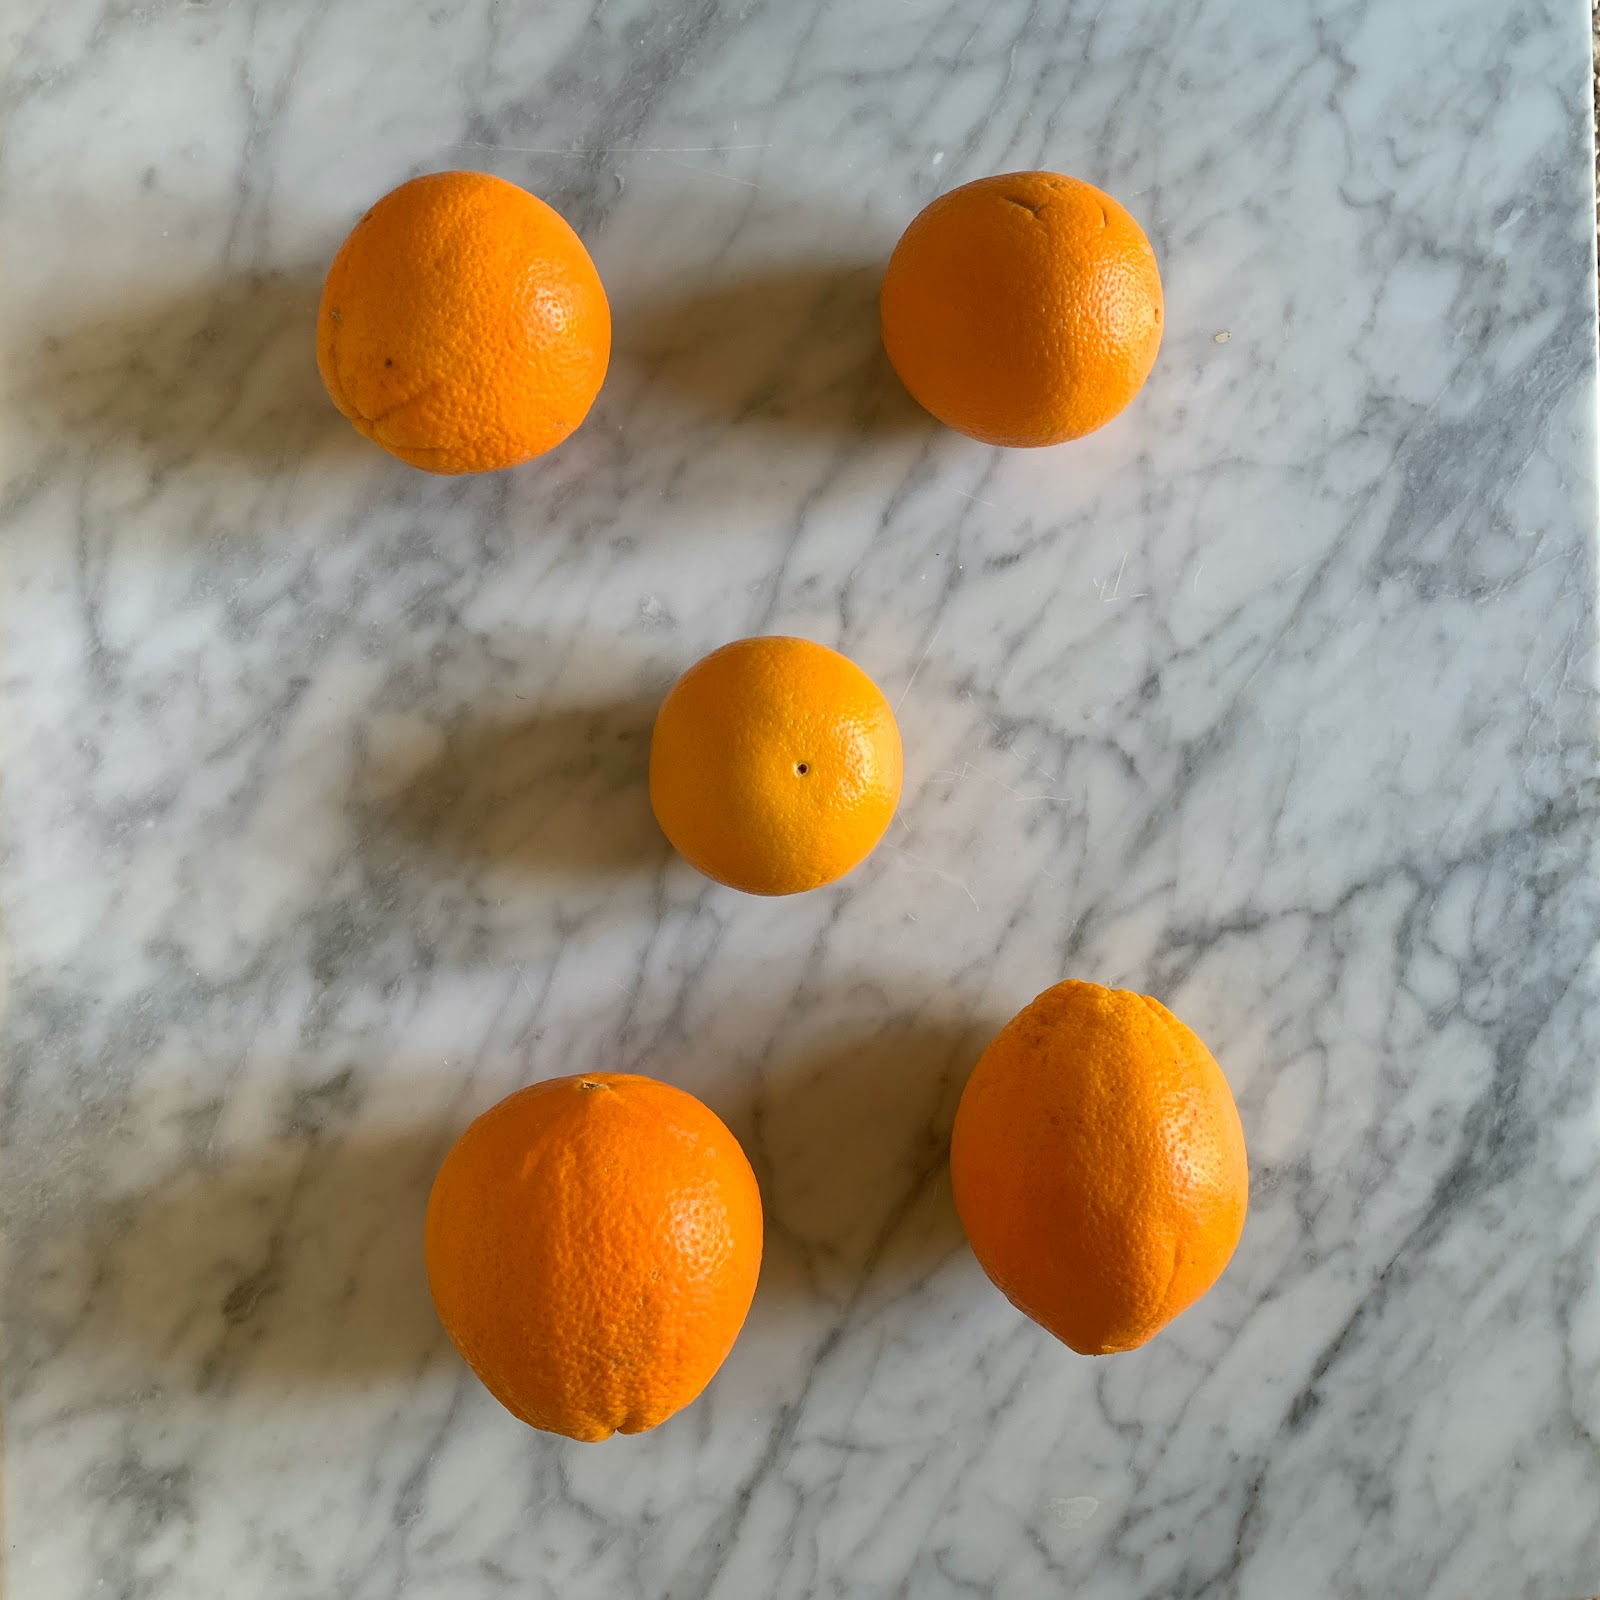 Oranges arranged like dots on a die or domino. 2 then 1 then 2 more.